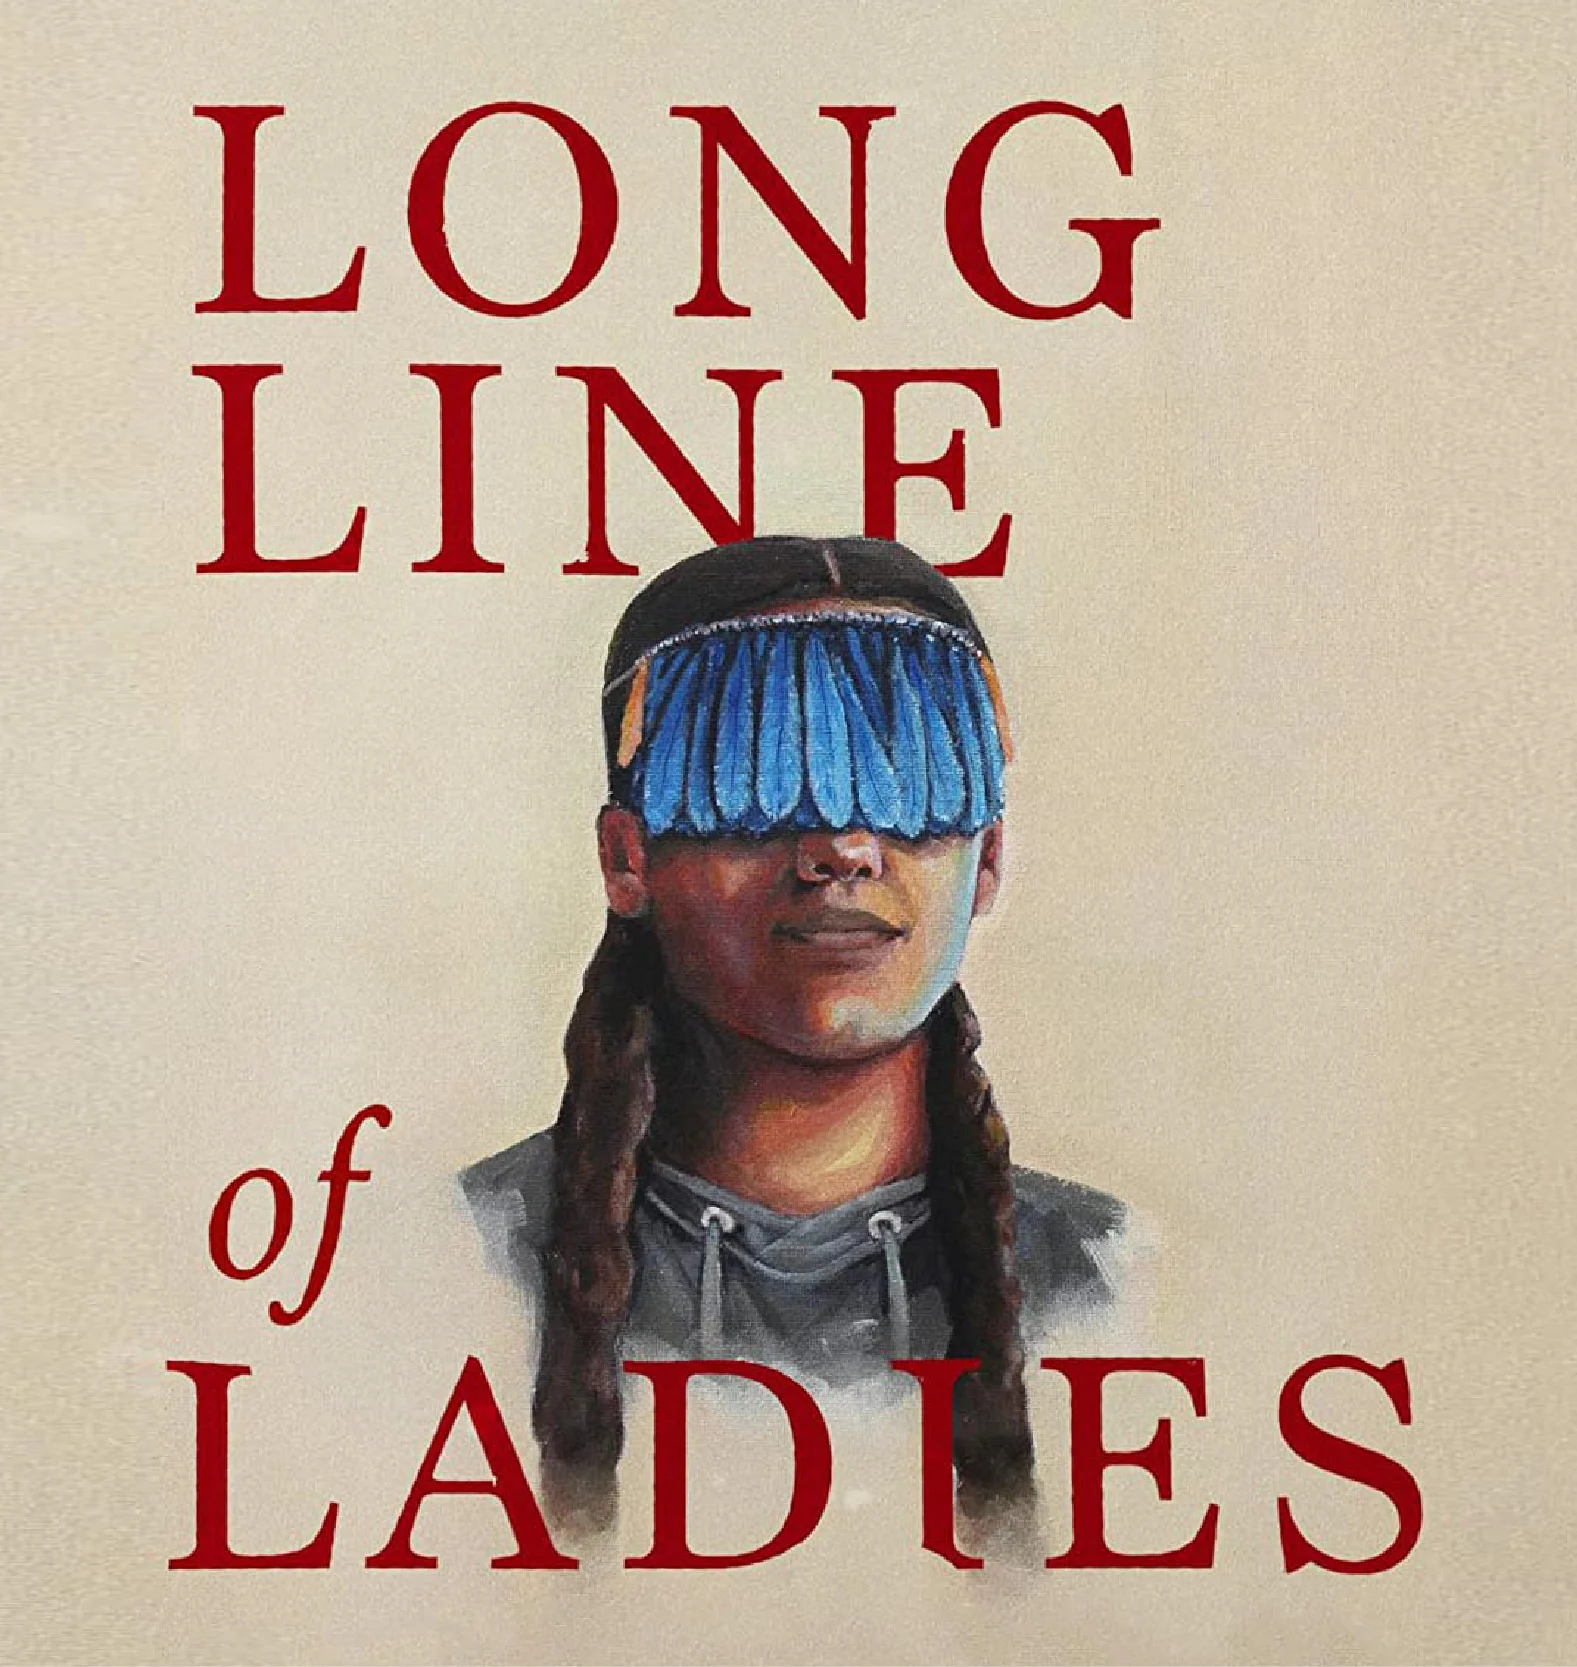 The cover of long line of ladies.